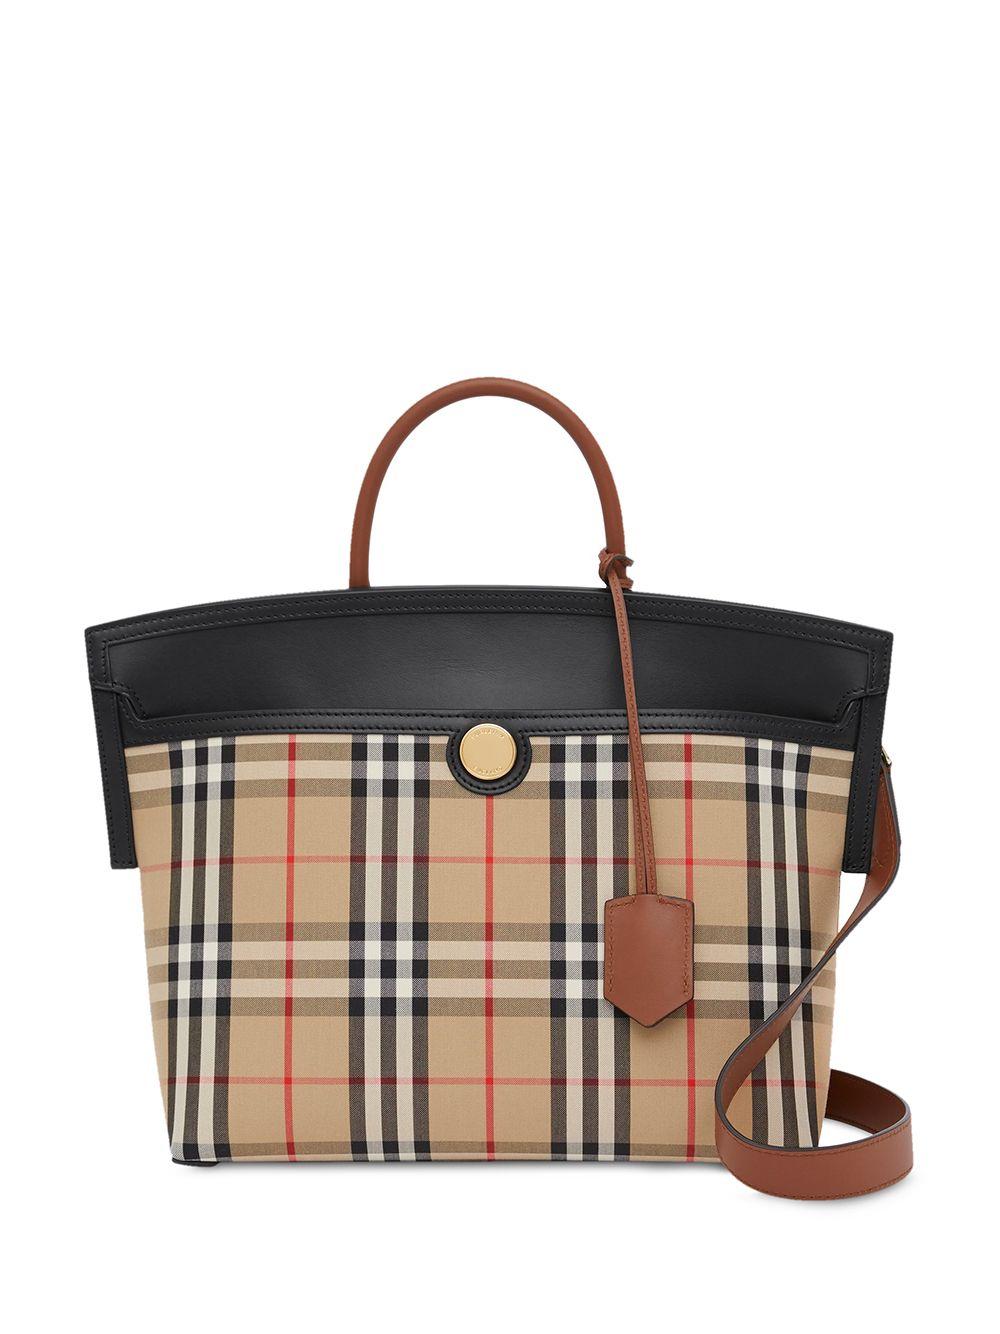 Burberry Small Vintage Check Society Top Handle Bag in Black | Lyst